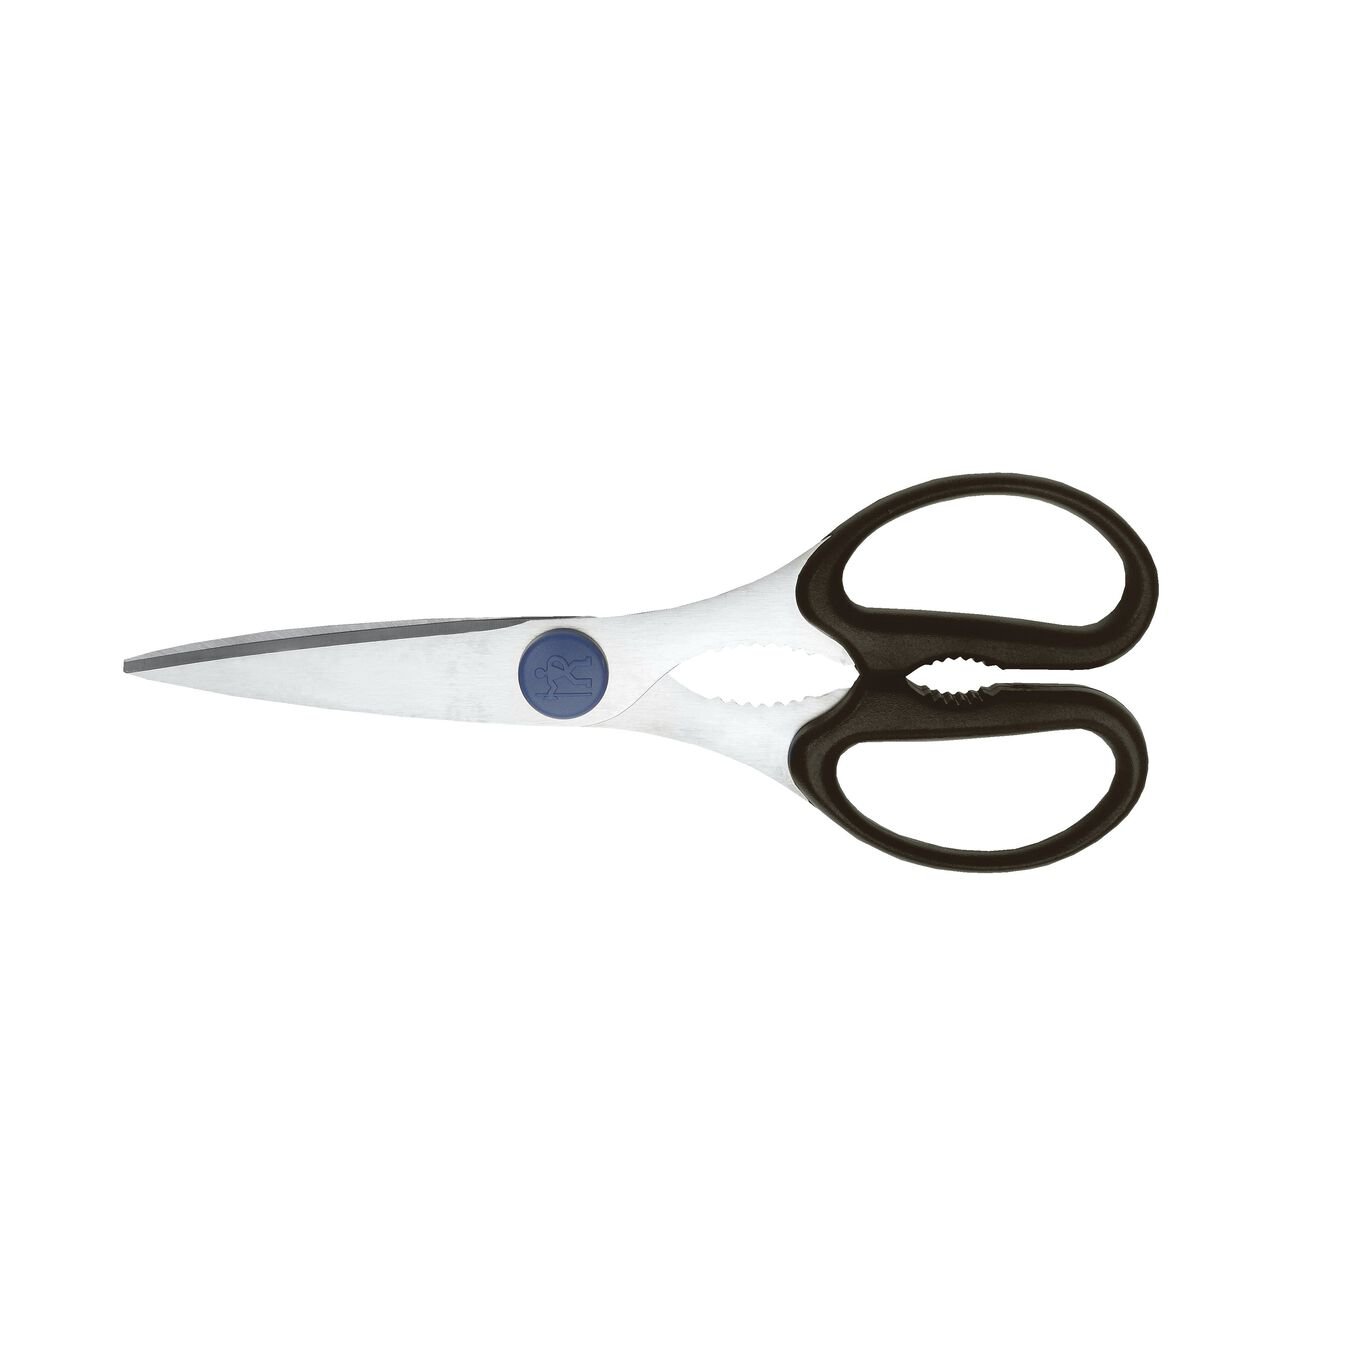 top view of the take apart kitchen shears on a white background